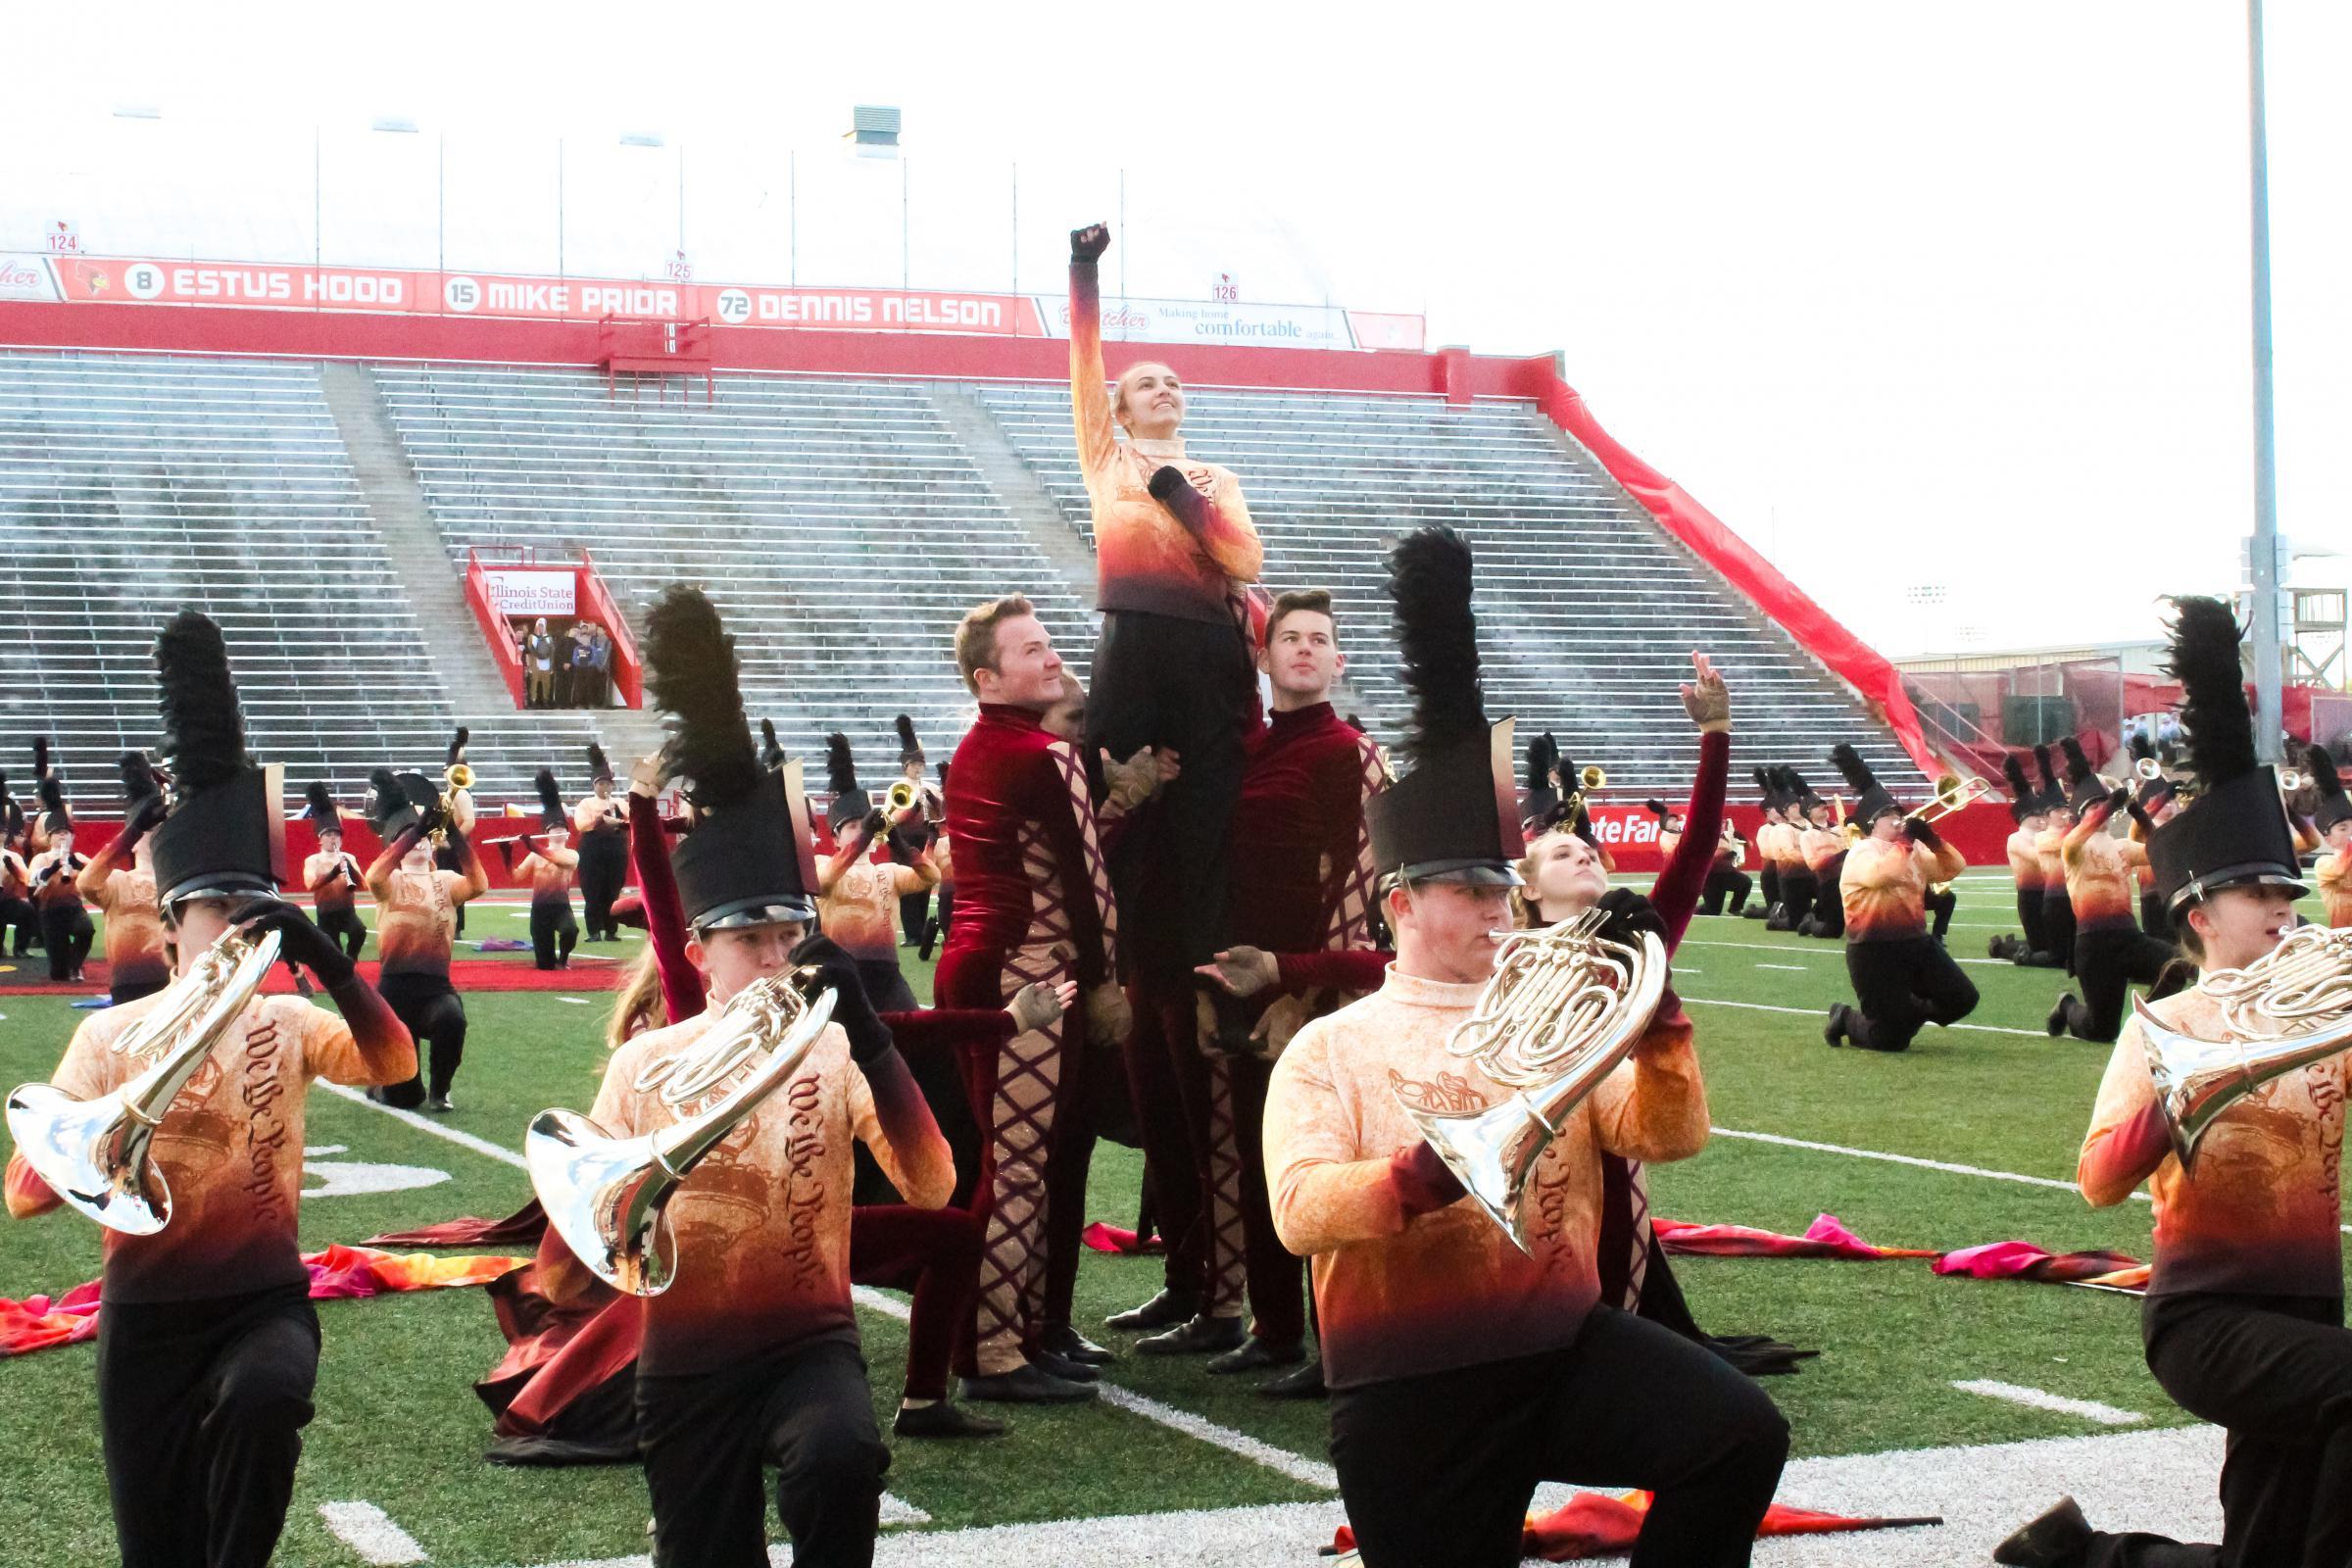 Illinois State University Drumline Logo - Photos: Marching Bands Compete At State Championships | WGLT